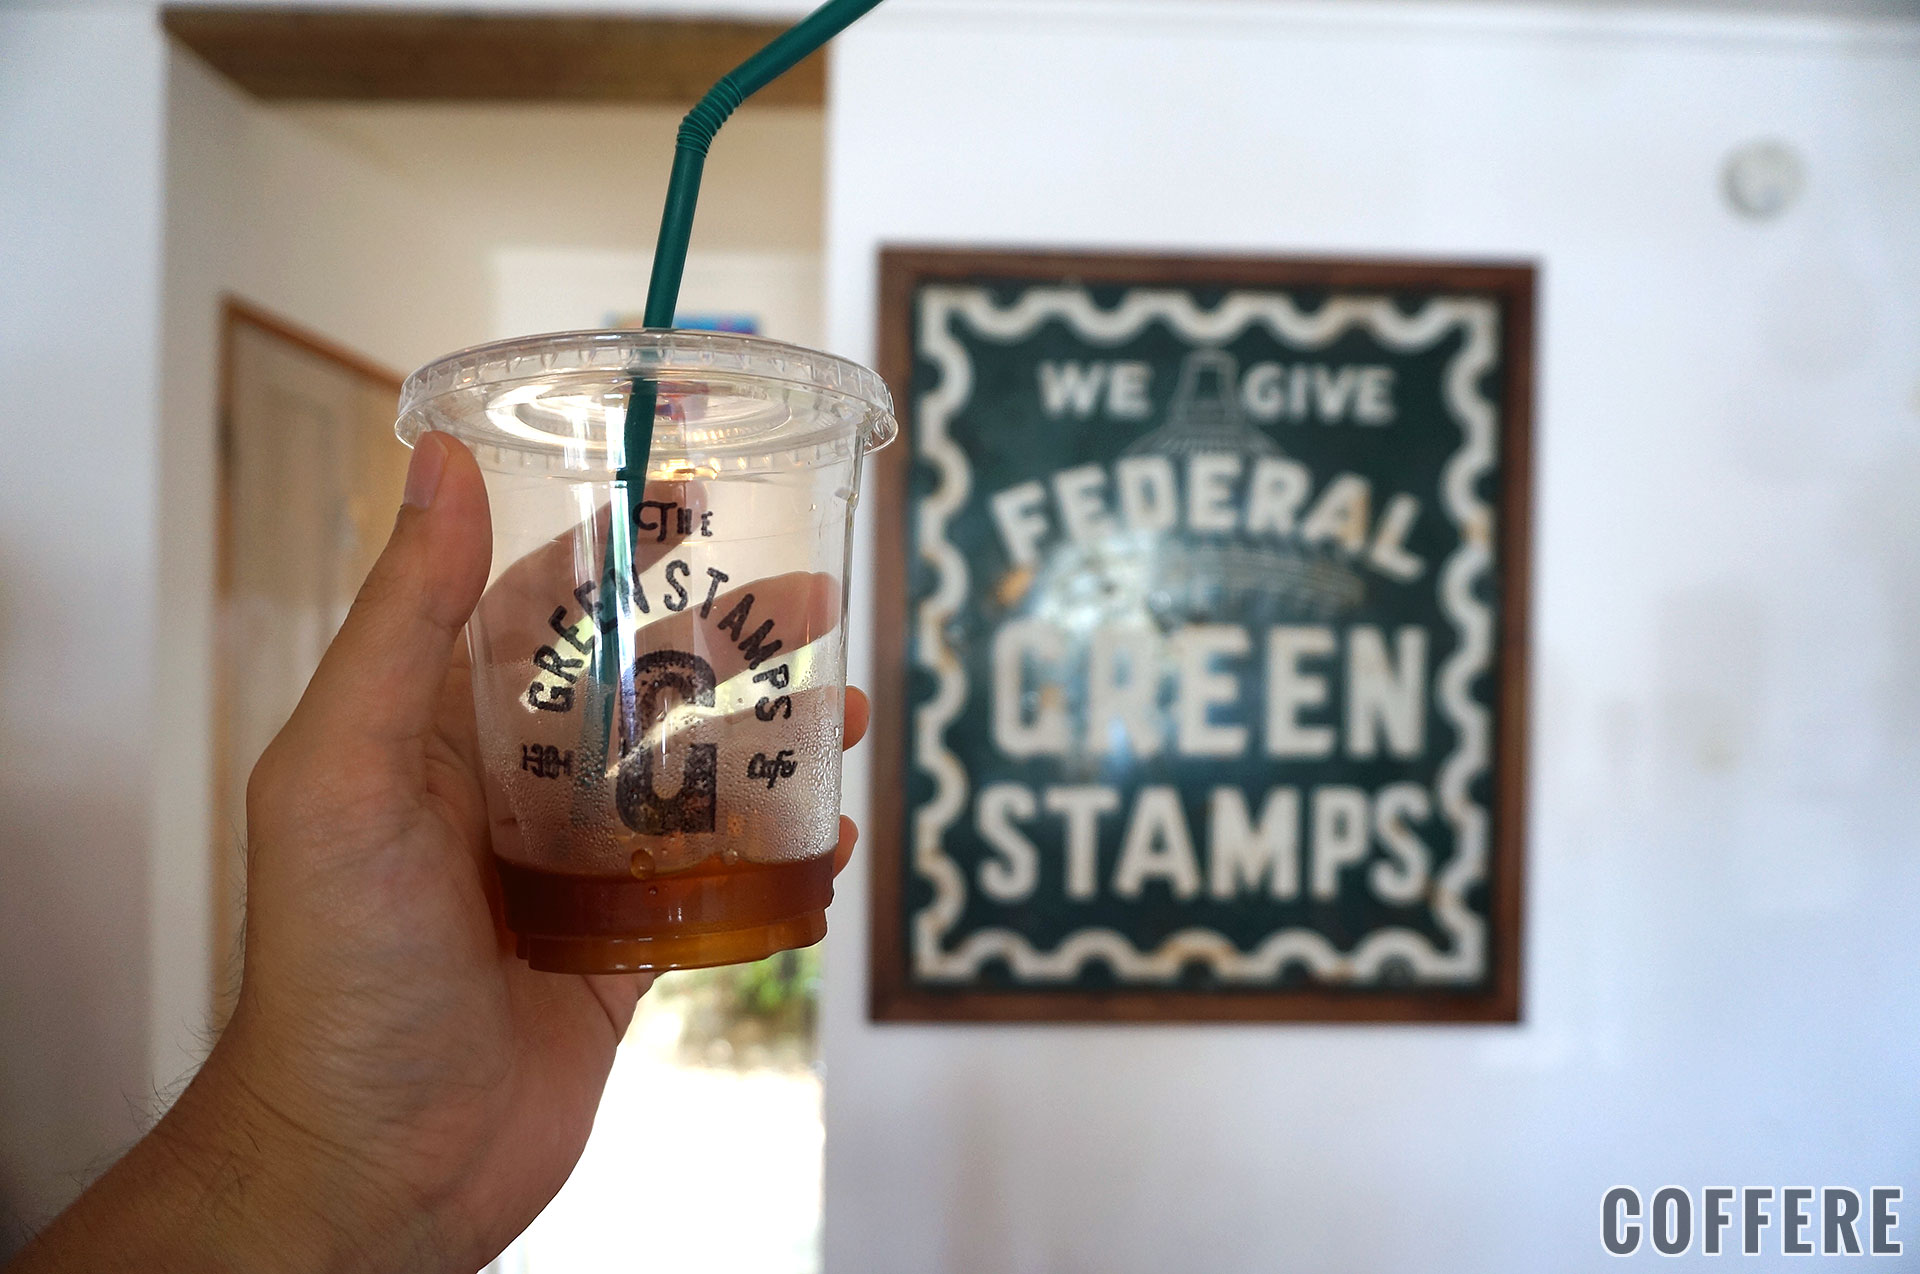 THE GREEN STAMPS CAFEのアイスコーヒーと看板